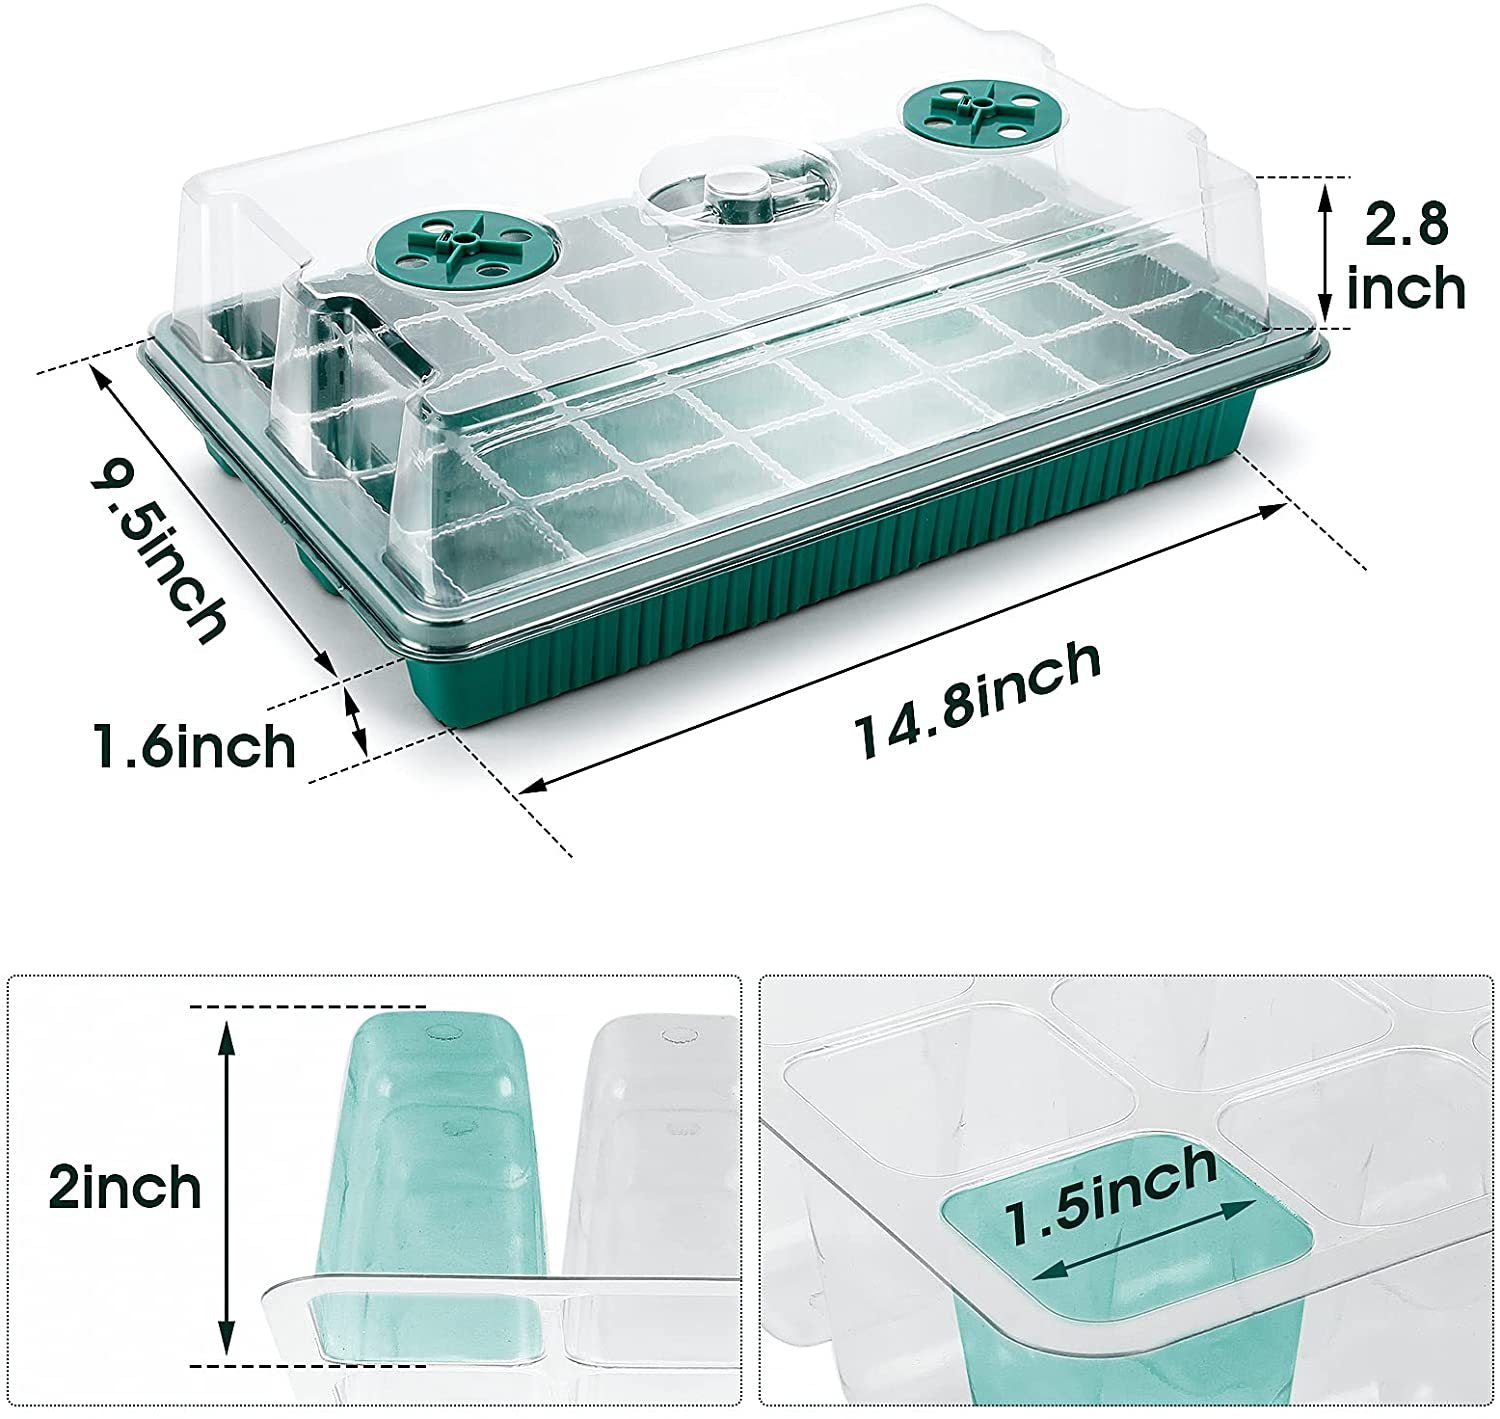 2-Pack 80 Cells Seed Starter Tray with Light Seed Starter Kit with Grow LightSeedling Starter Trays with Vented Humidity Dome and Base  Indoor Gardening Plant Germination Kit Round Light